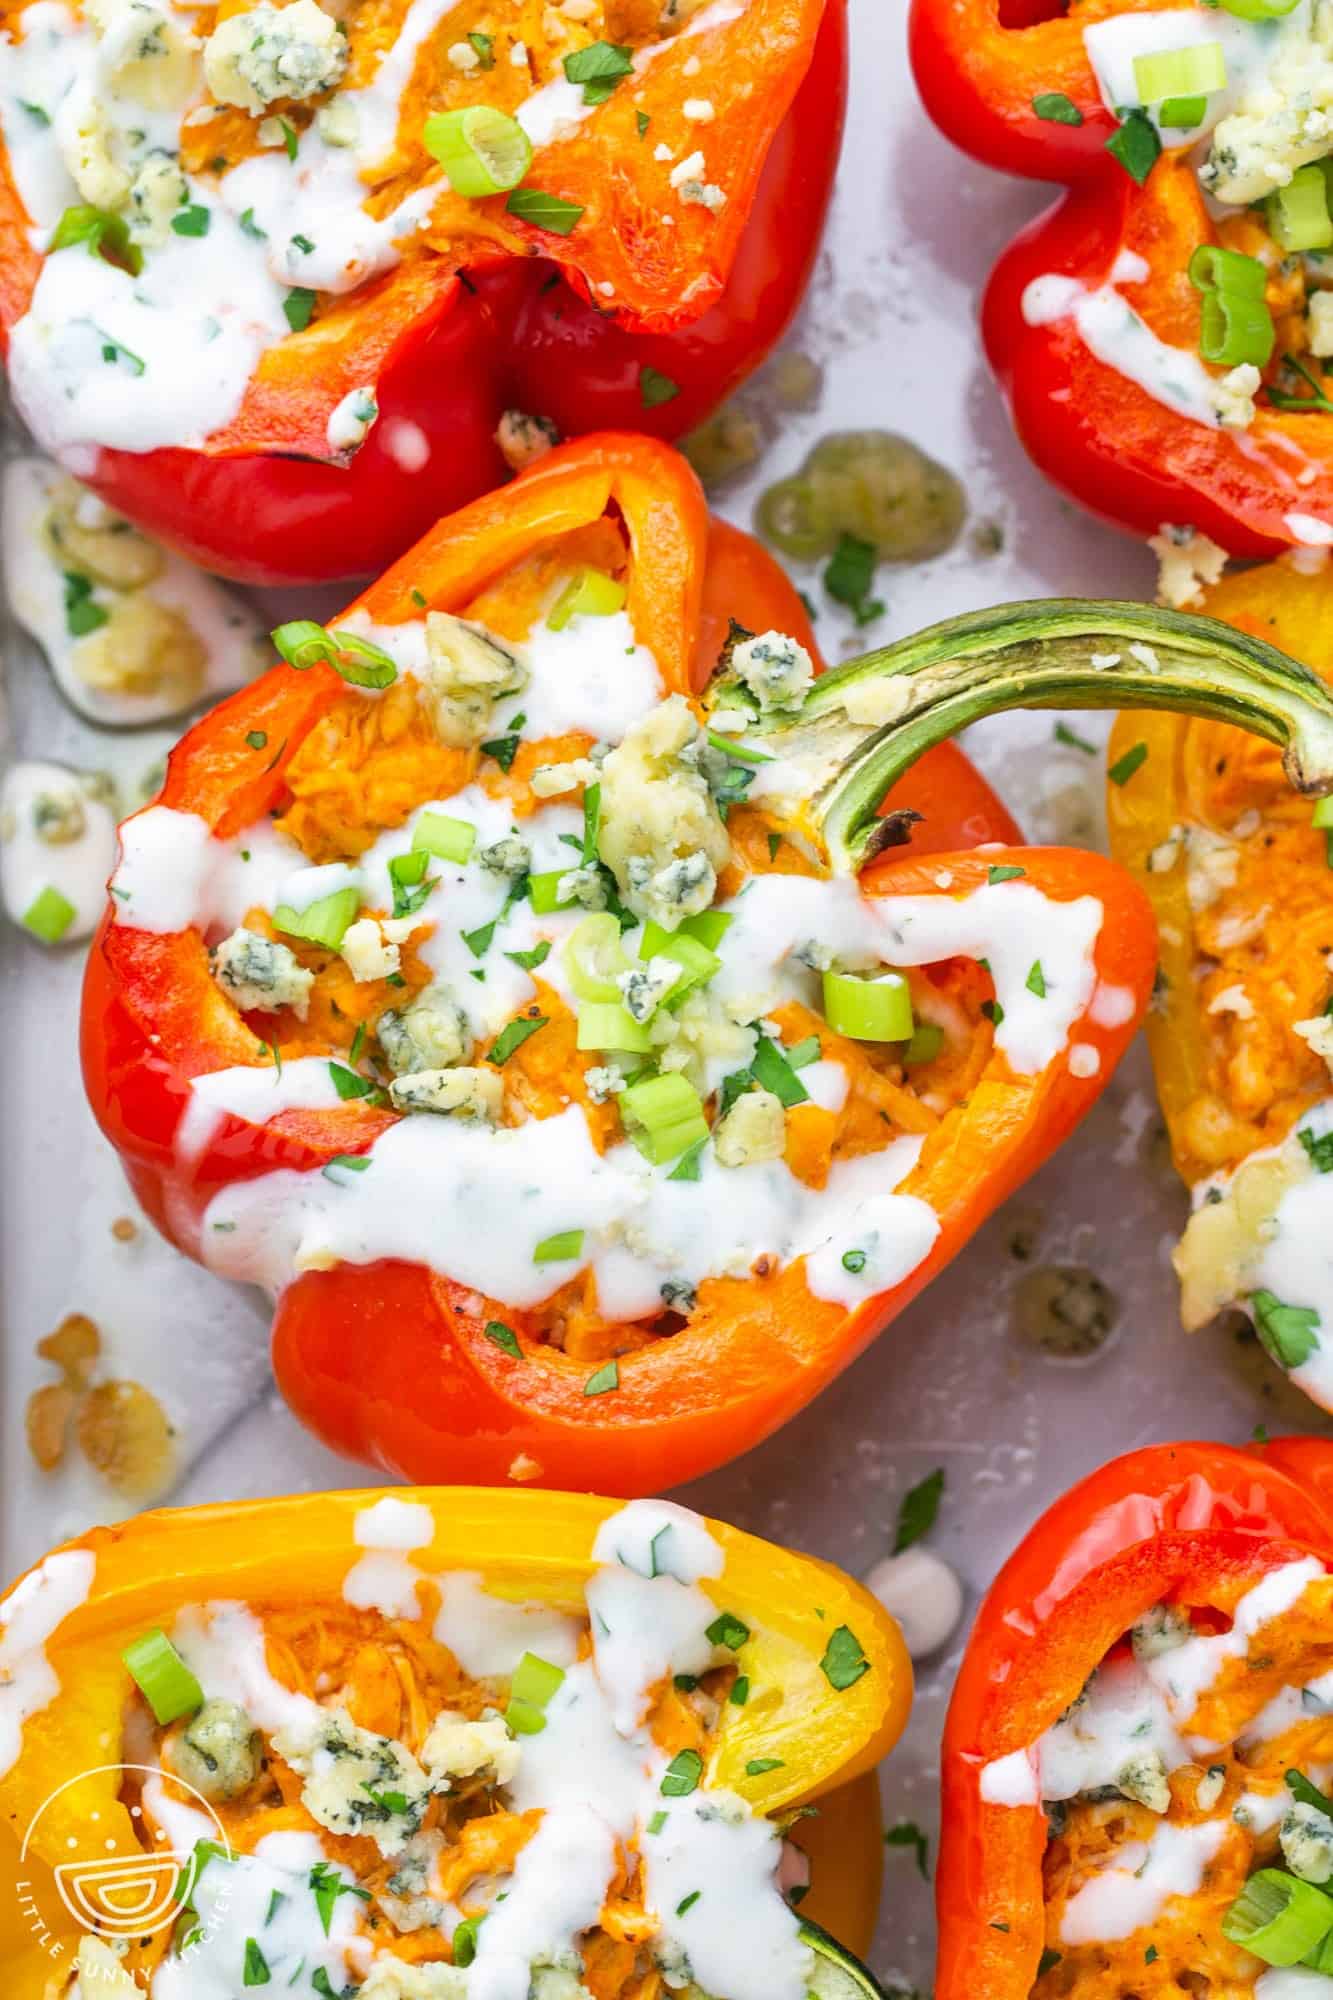 Red and yellow bell peppers, cut in half and baked, stuffed with buffalo chicken and blue cheese.